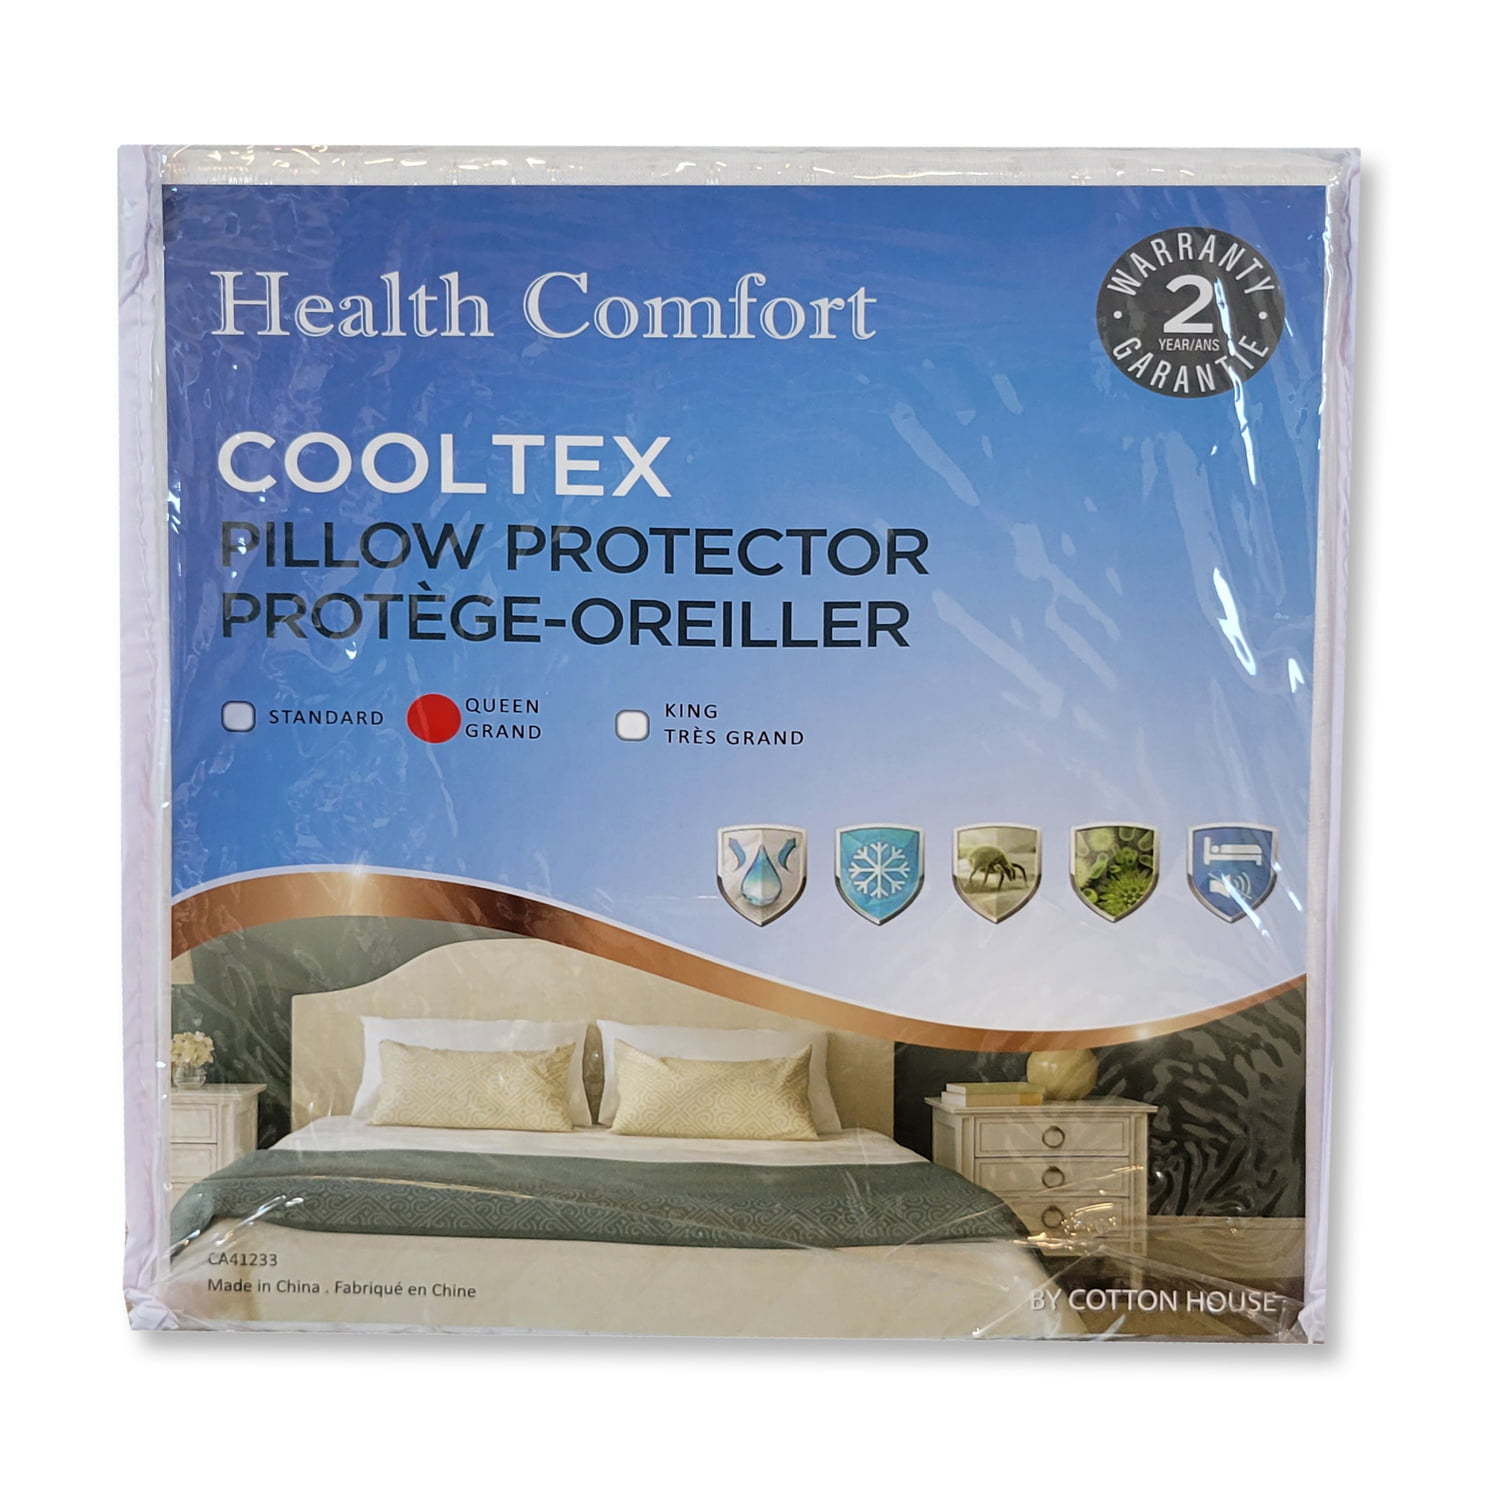 Cotton House - CoolTex Pillow Protector, Waterproof, Queen Size, White 